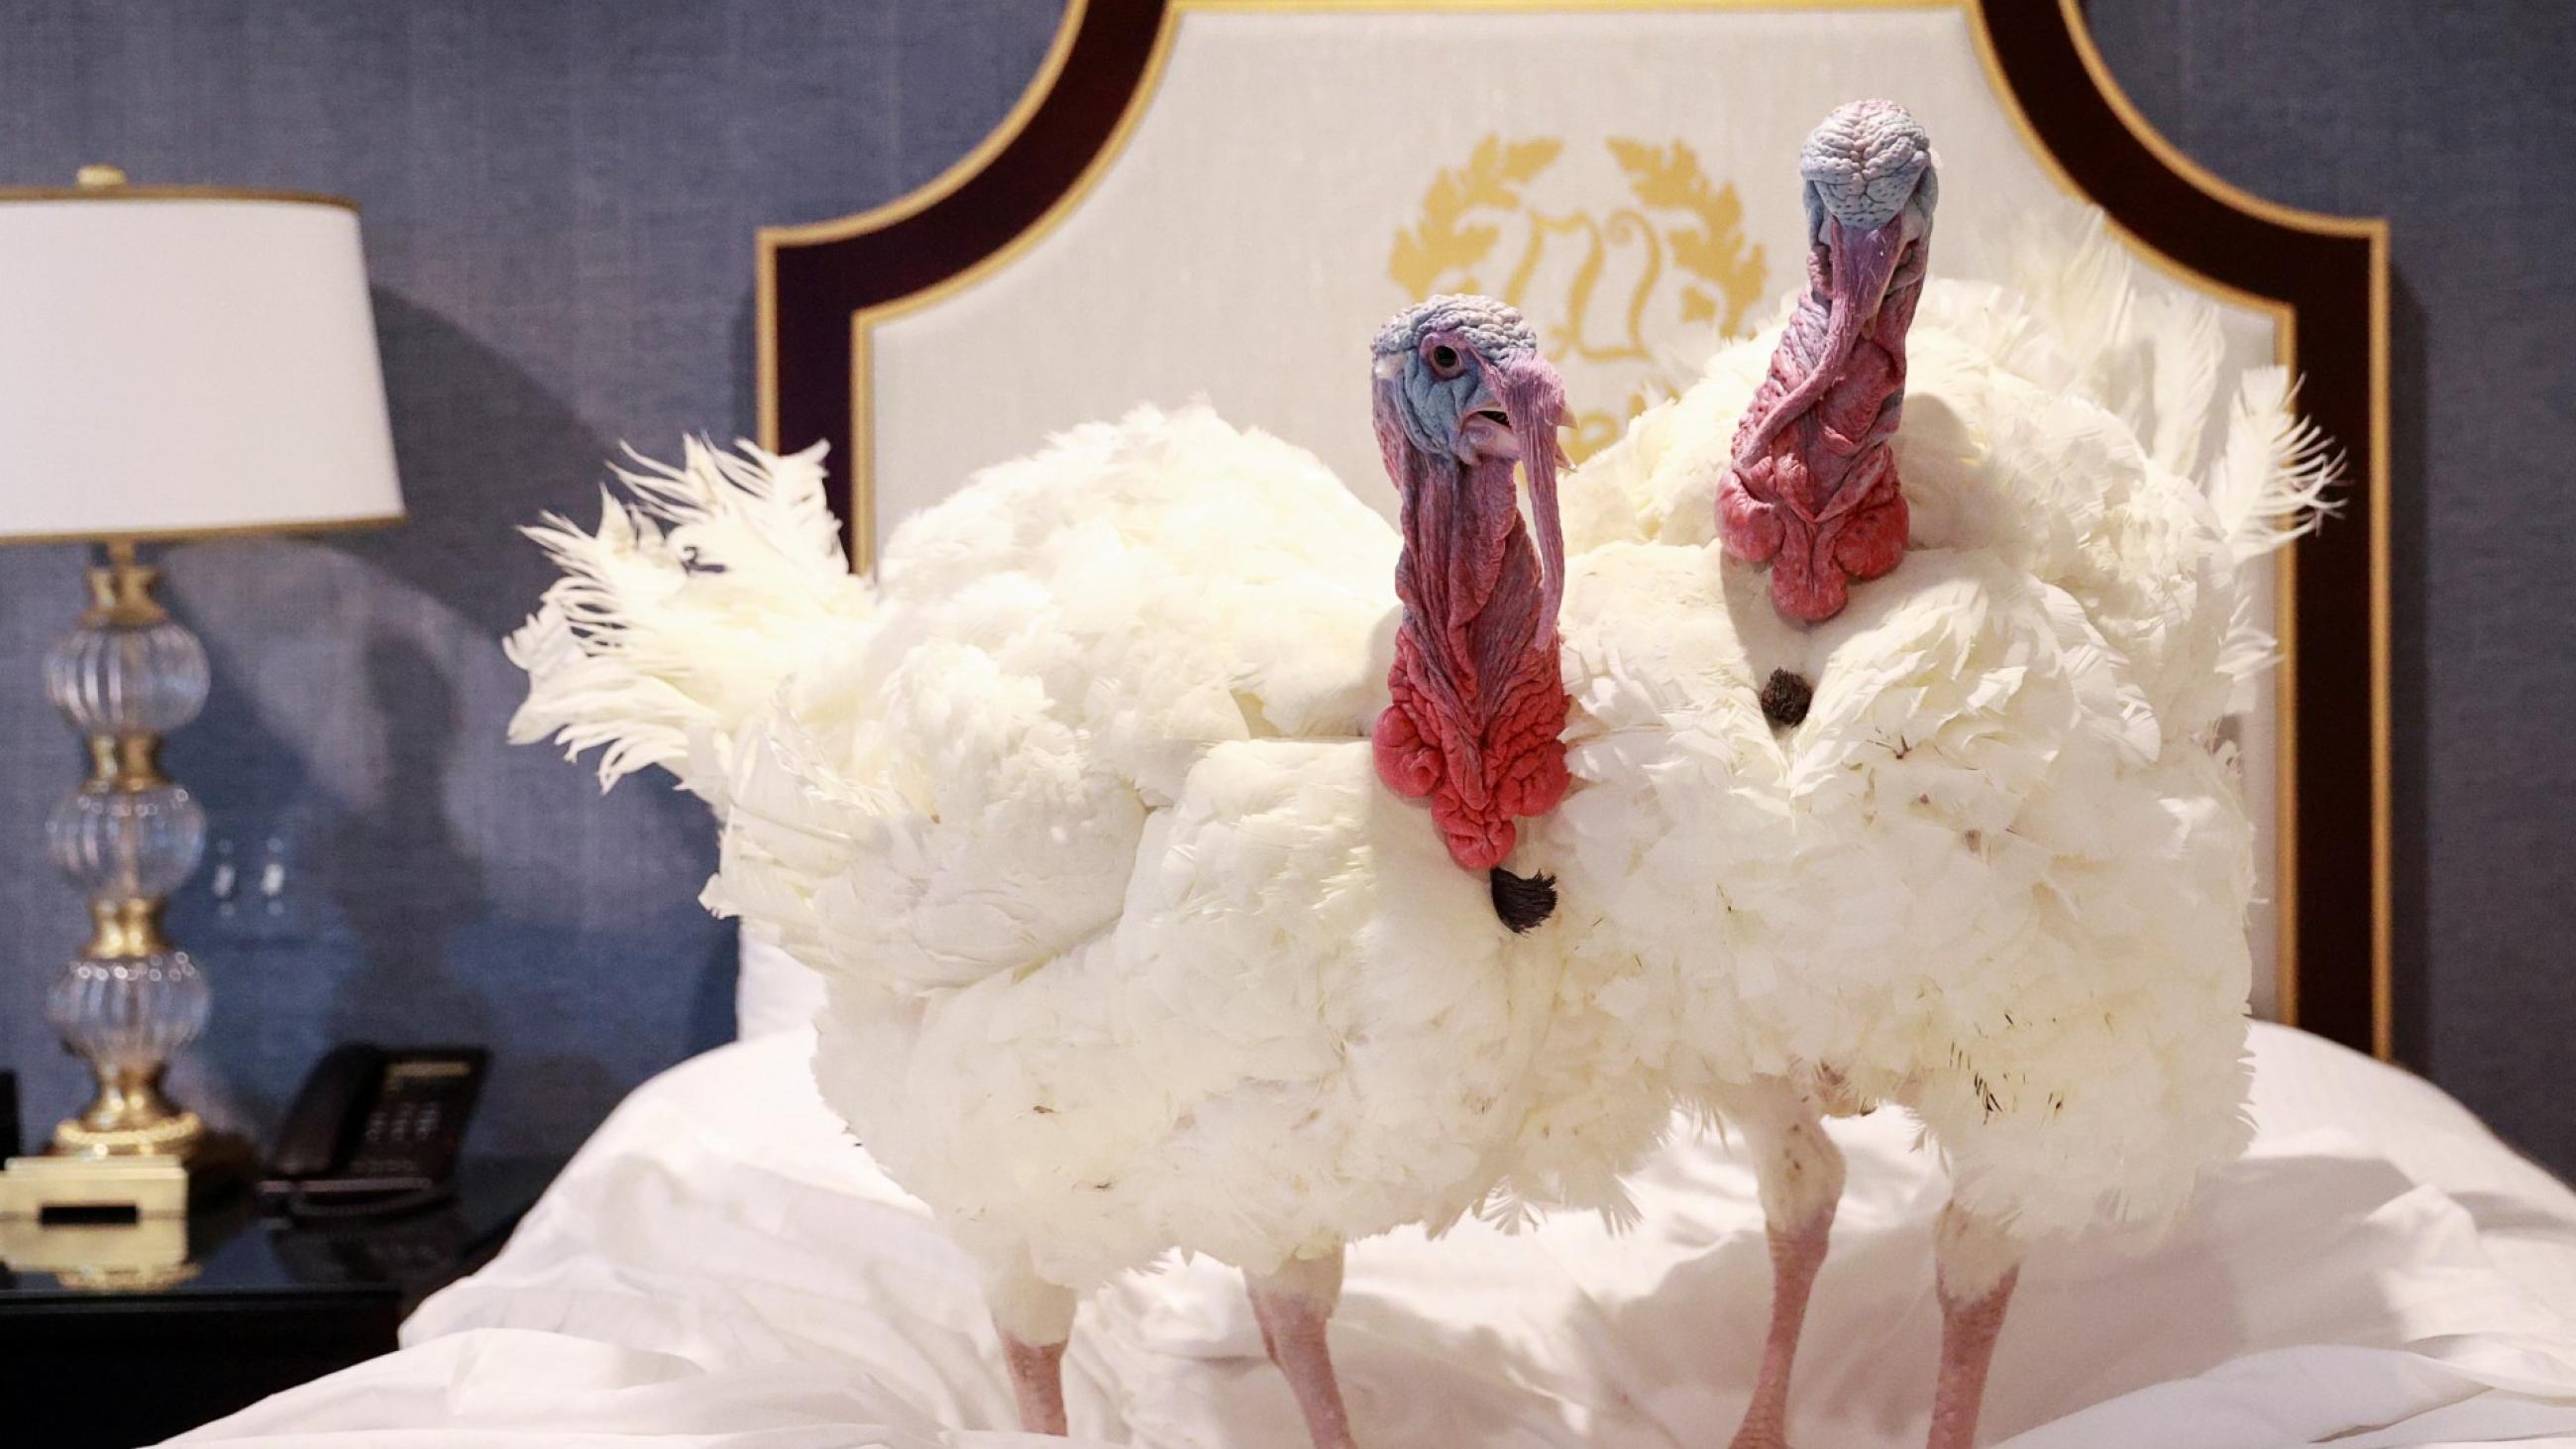 Two turkeys, who will serve as the National Thanksgiving Turkey and alternate, are seen in a hotel room ahead of the seventy-third annual National Turkey Presentation, prior to a press event to introduce them in Washington, DC, on November 23, 2020.